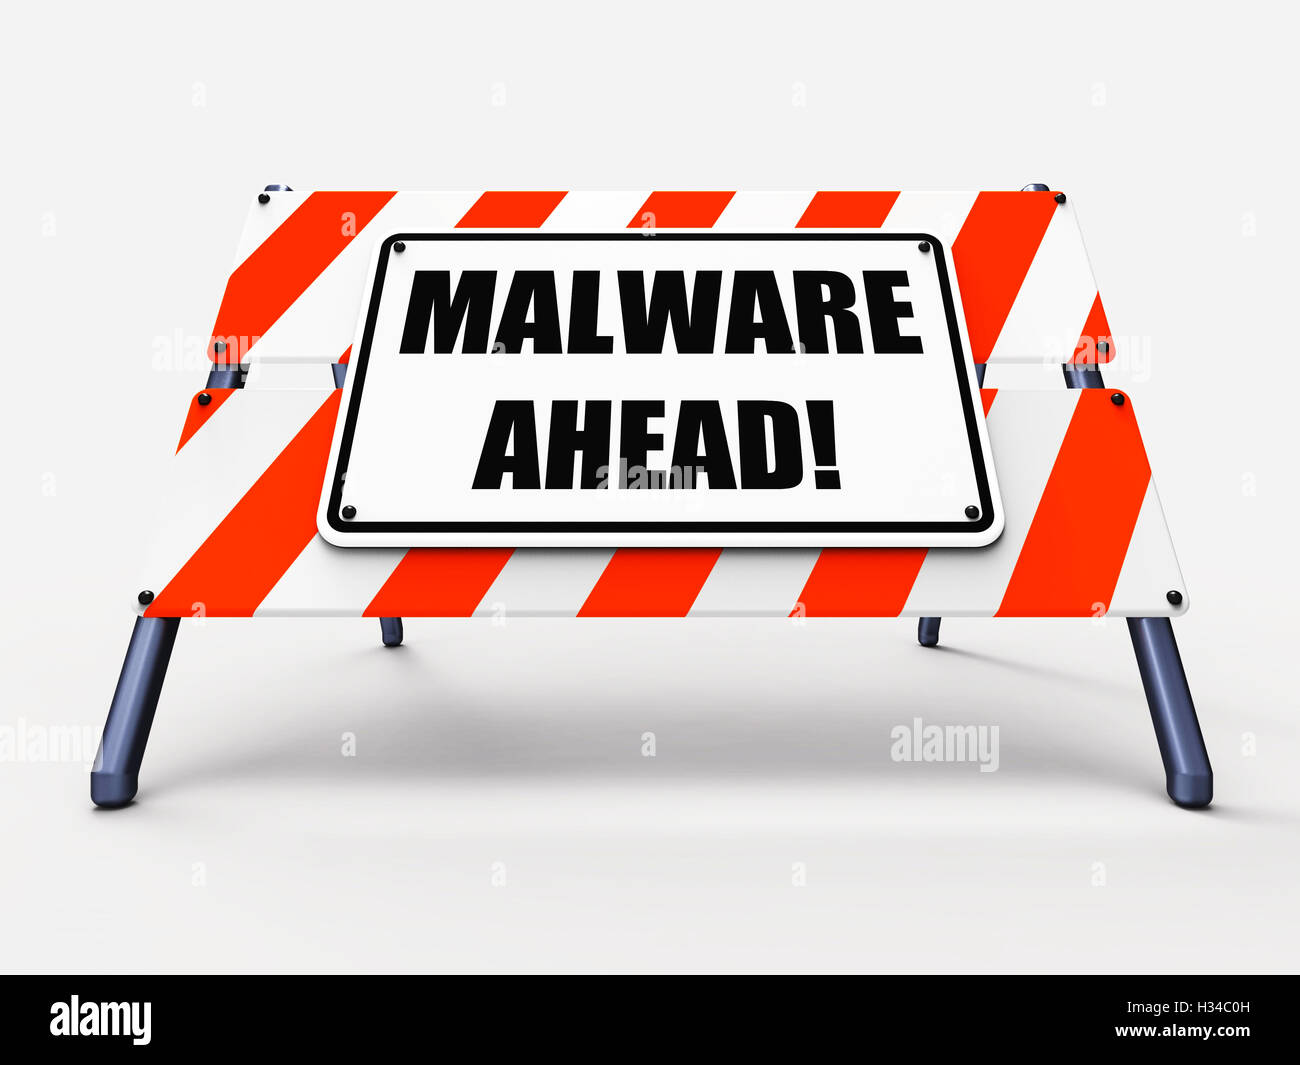 Malware Ahead Refers to Malicious Danger for Computer Future Stock Photo